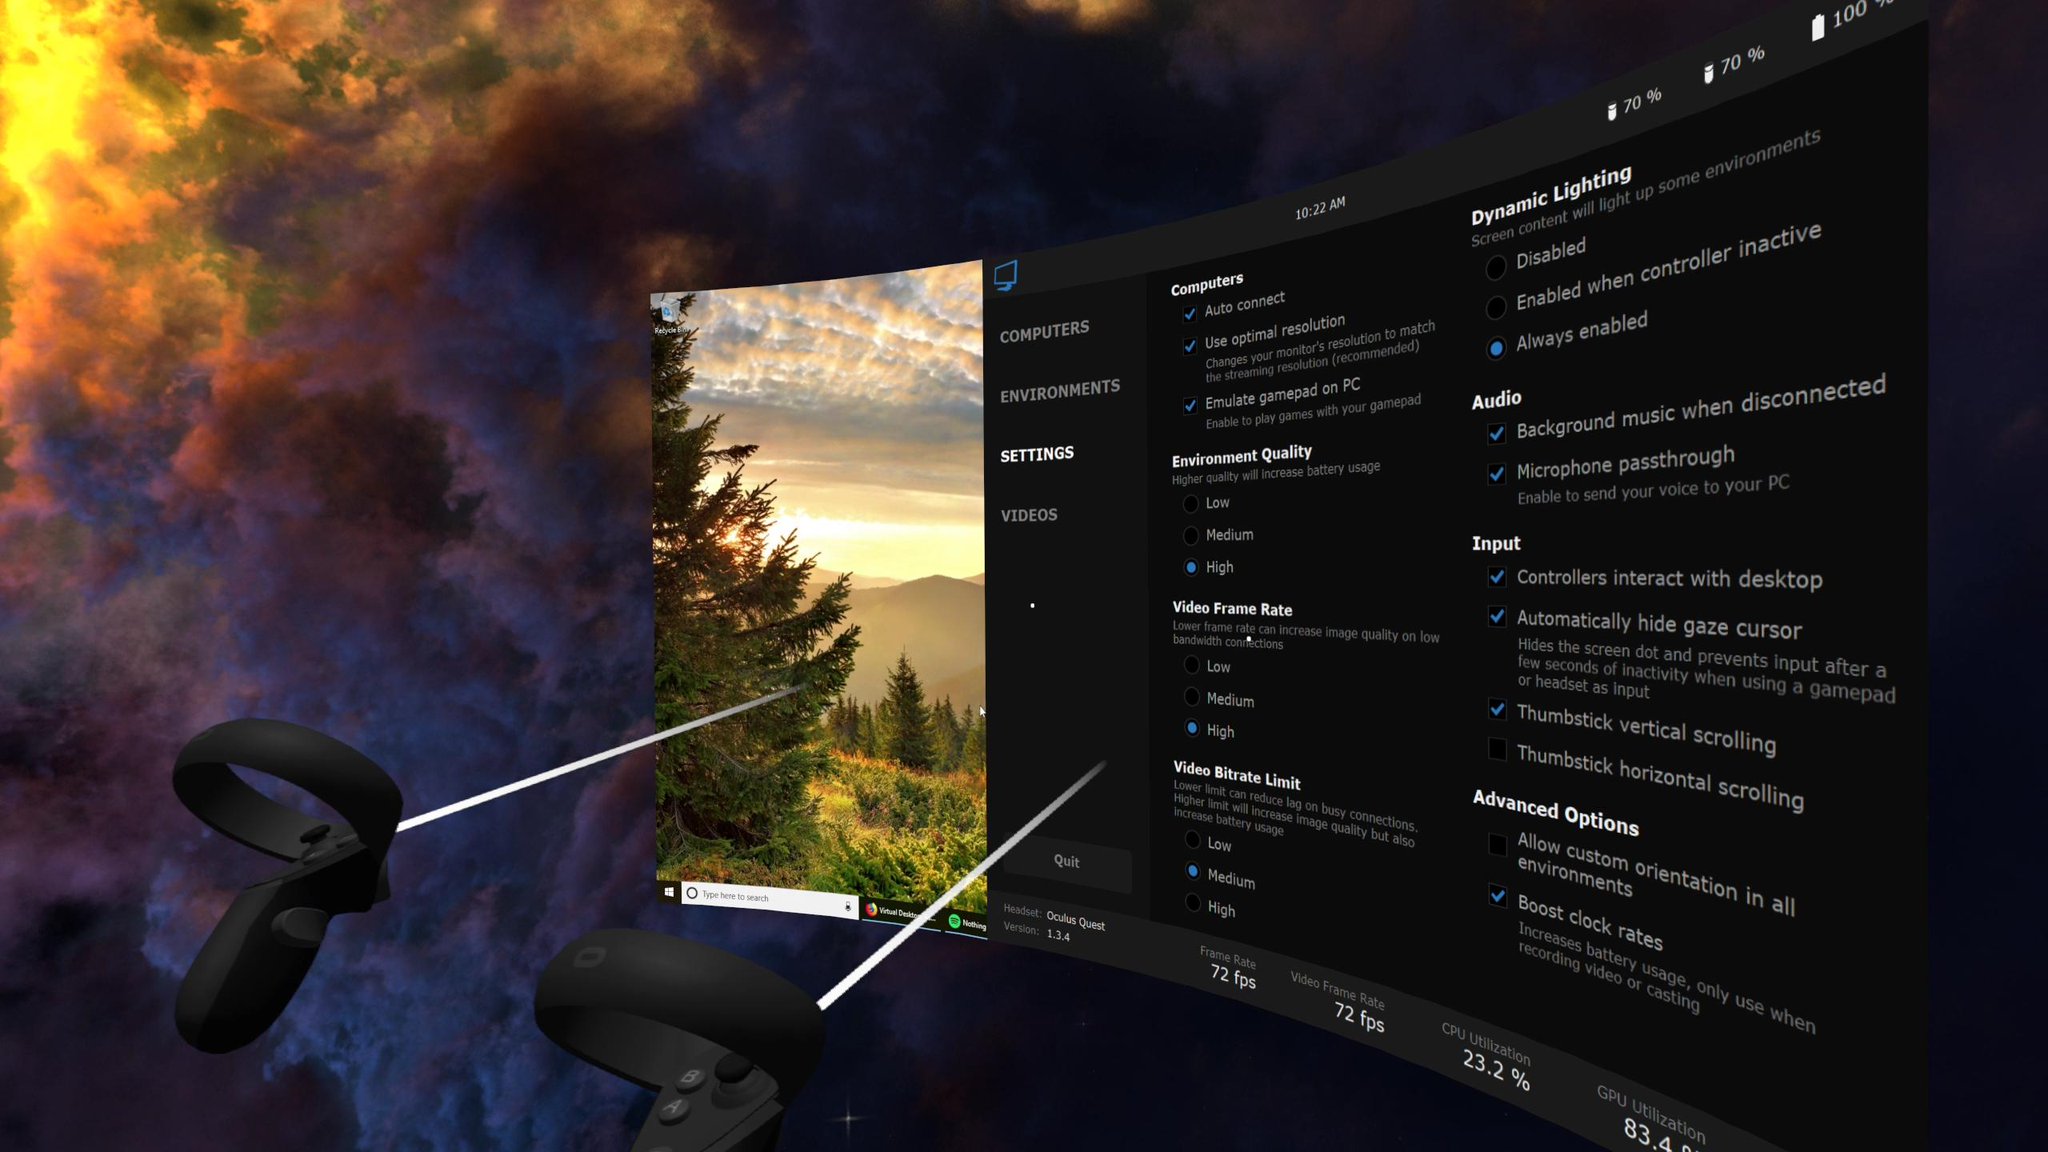 Renovering madras vanter This is What 'Virtual Desktop' Looks Like on Oculus Quest – Road to VR